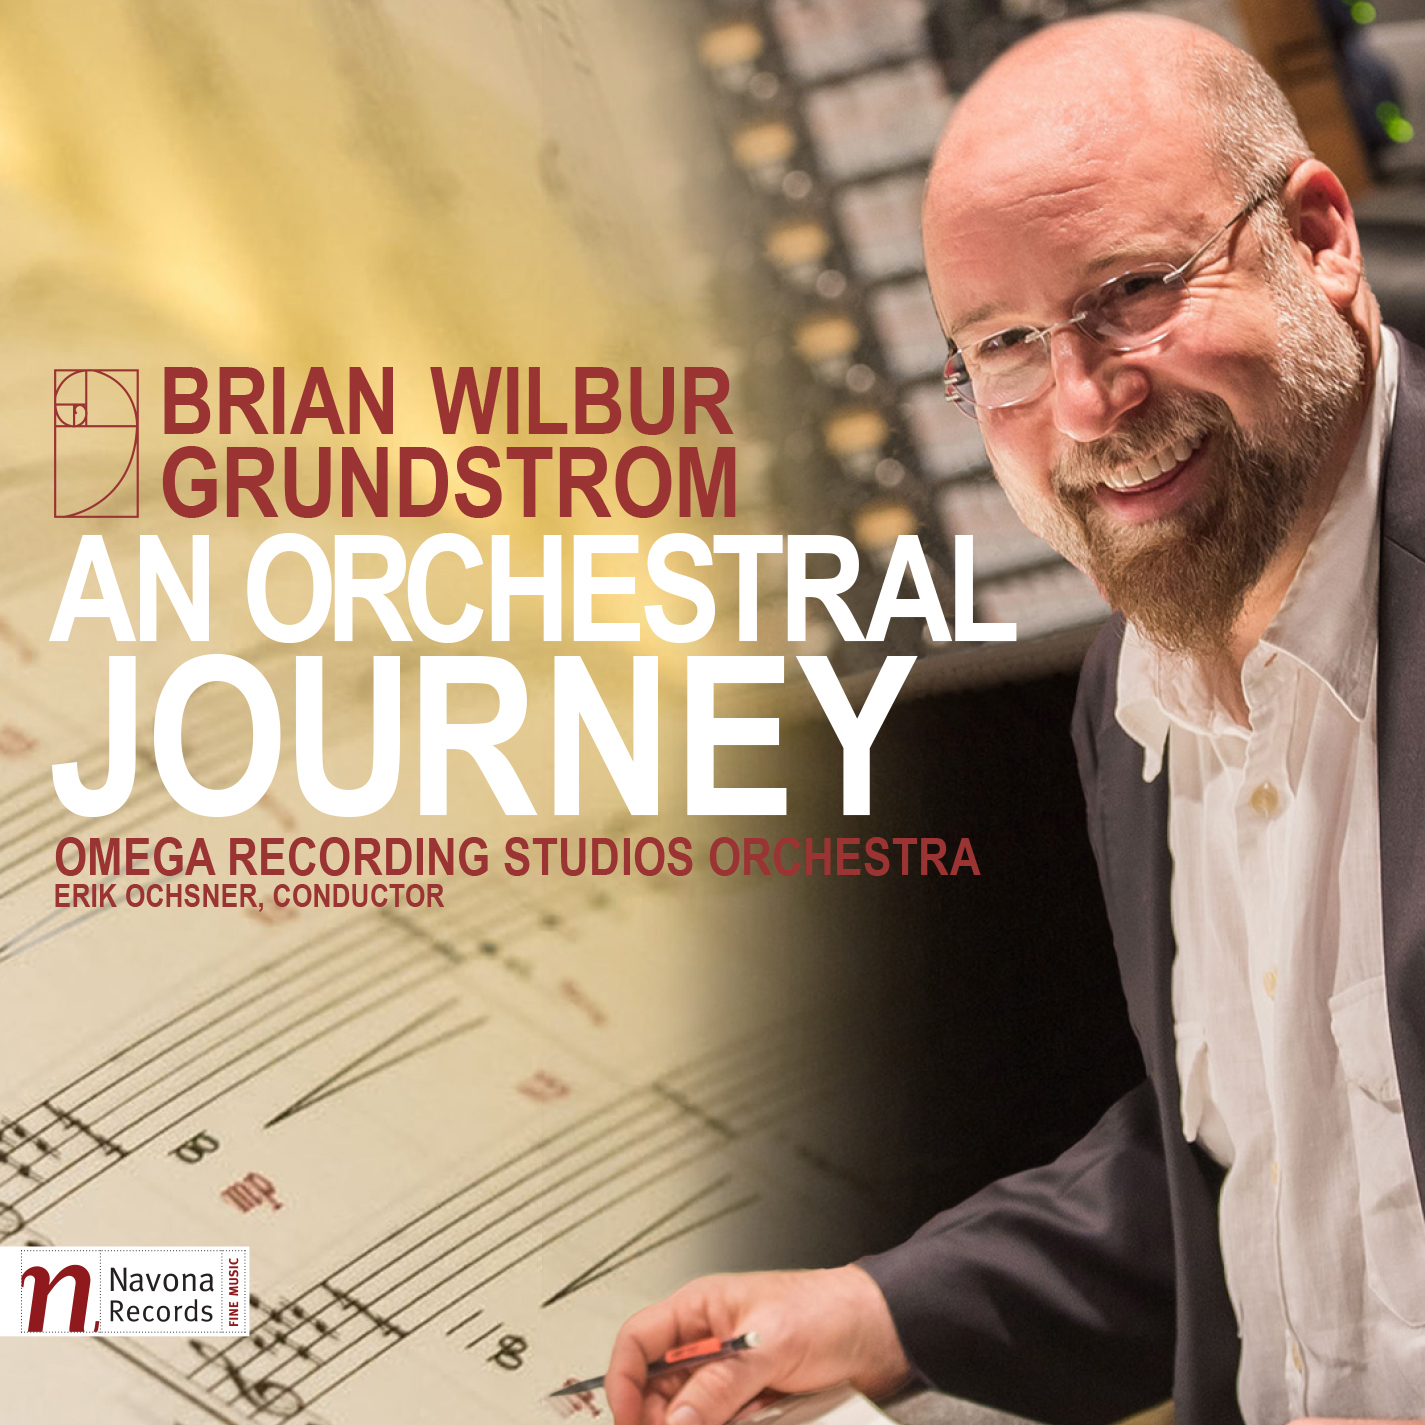 An Orchestral Journey CD Cover